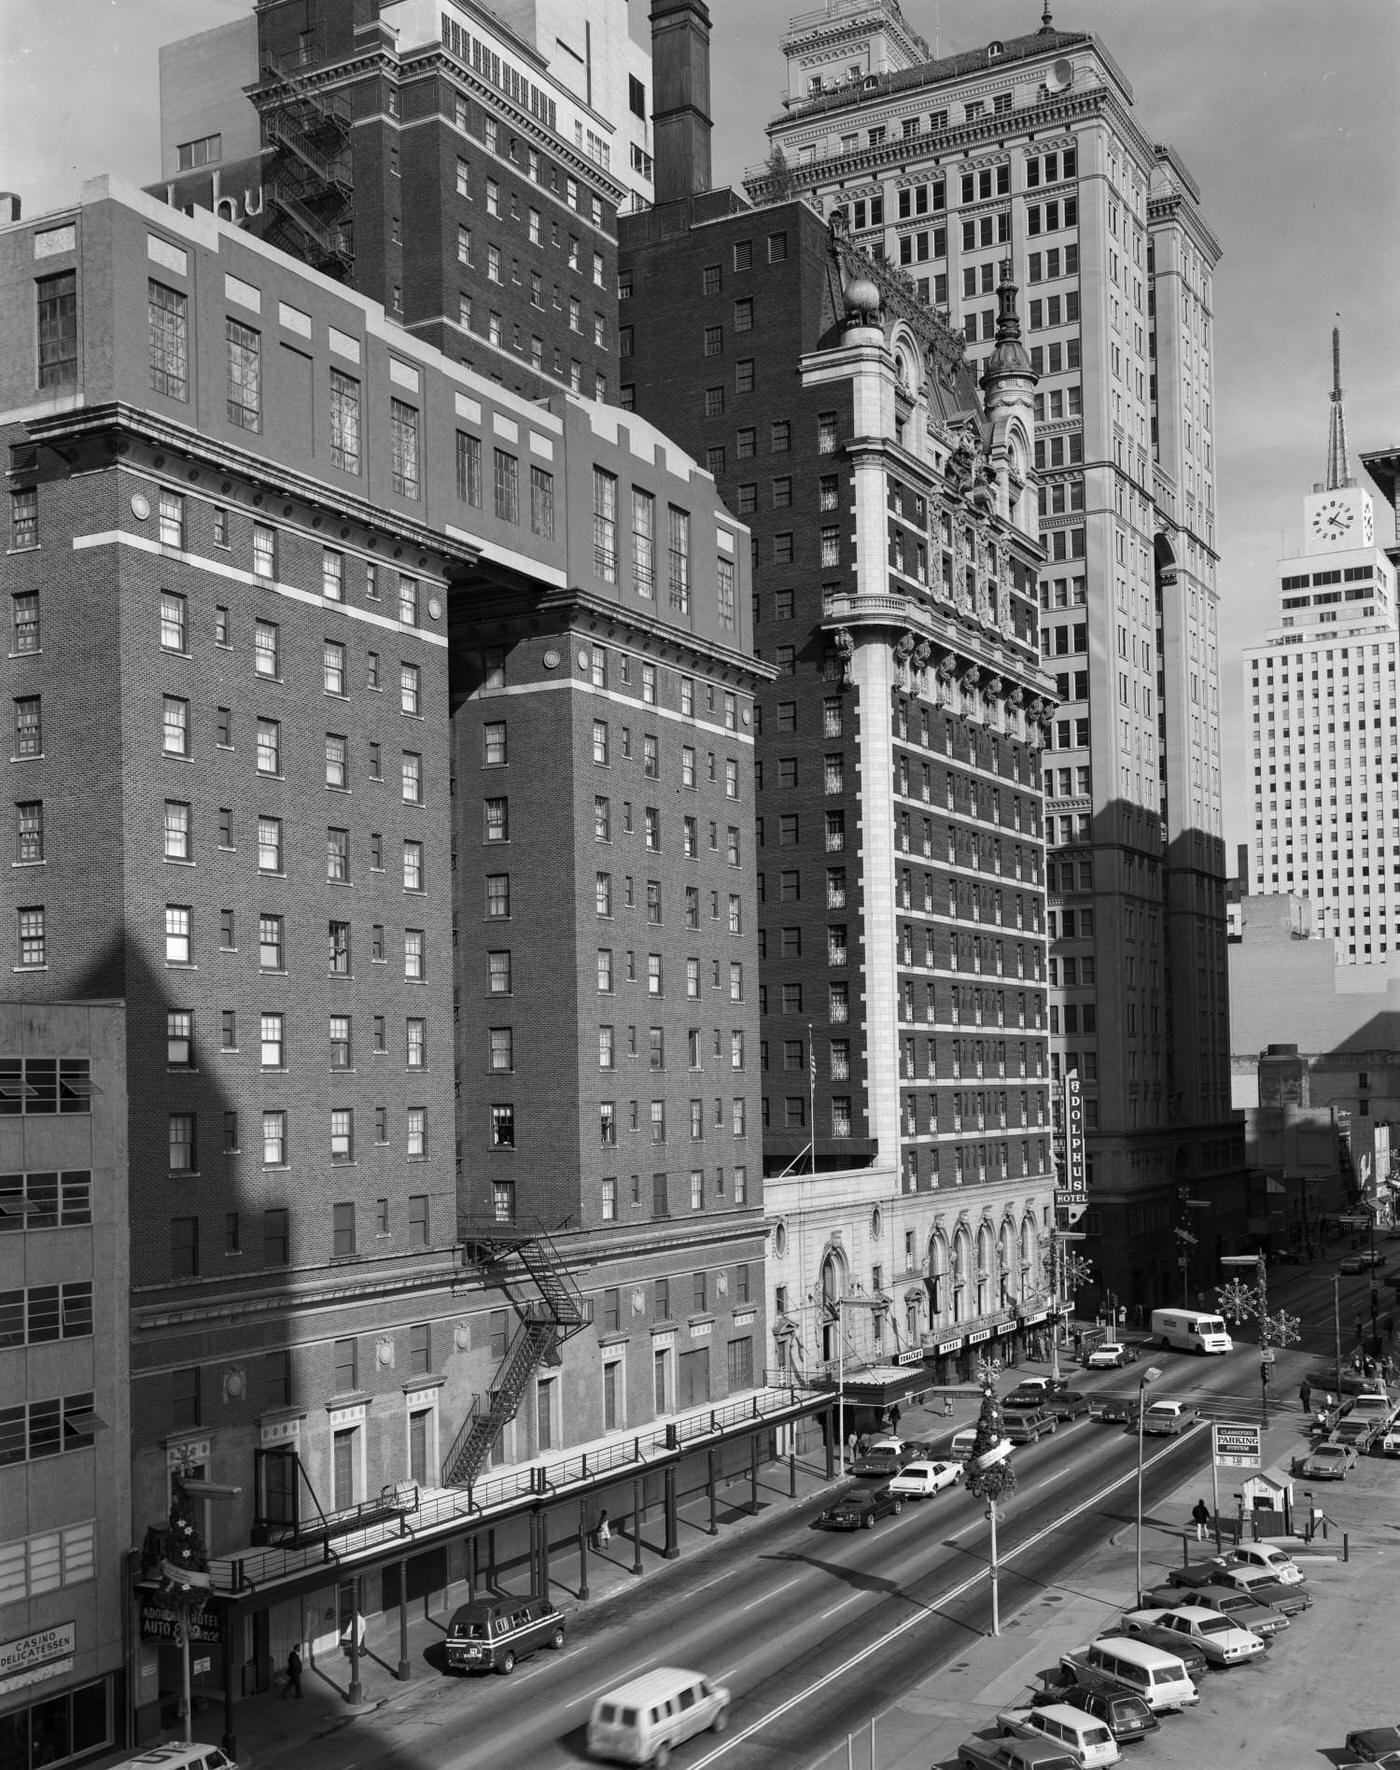 Various buildings, including the Adolphus Hotel and Magnolia in Downtown, Dallas, 1960s